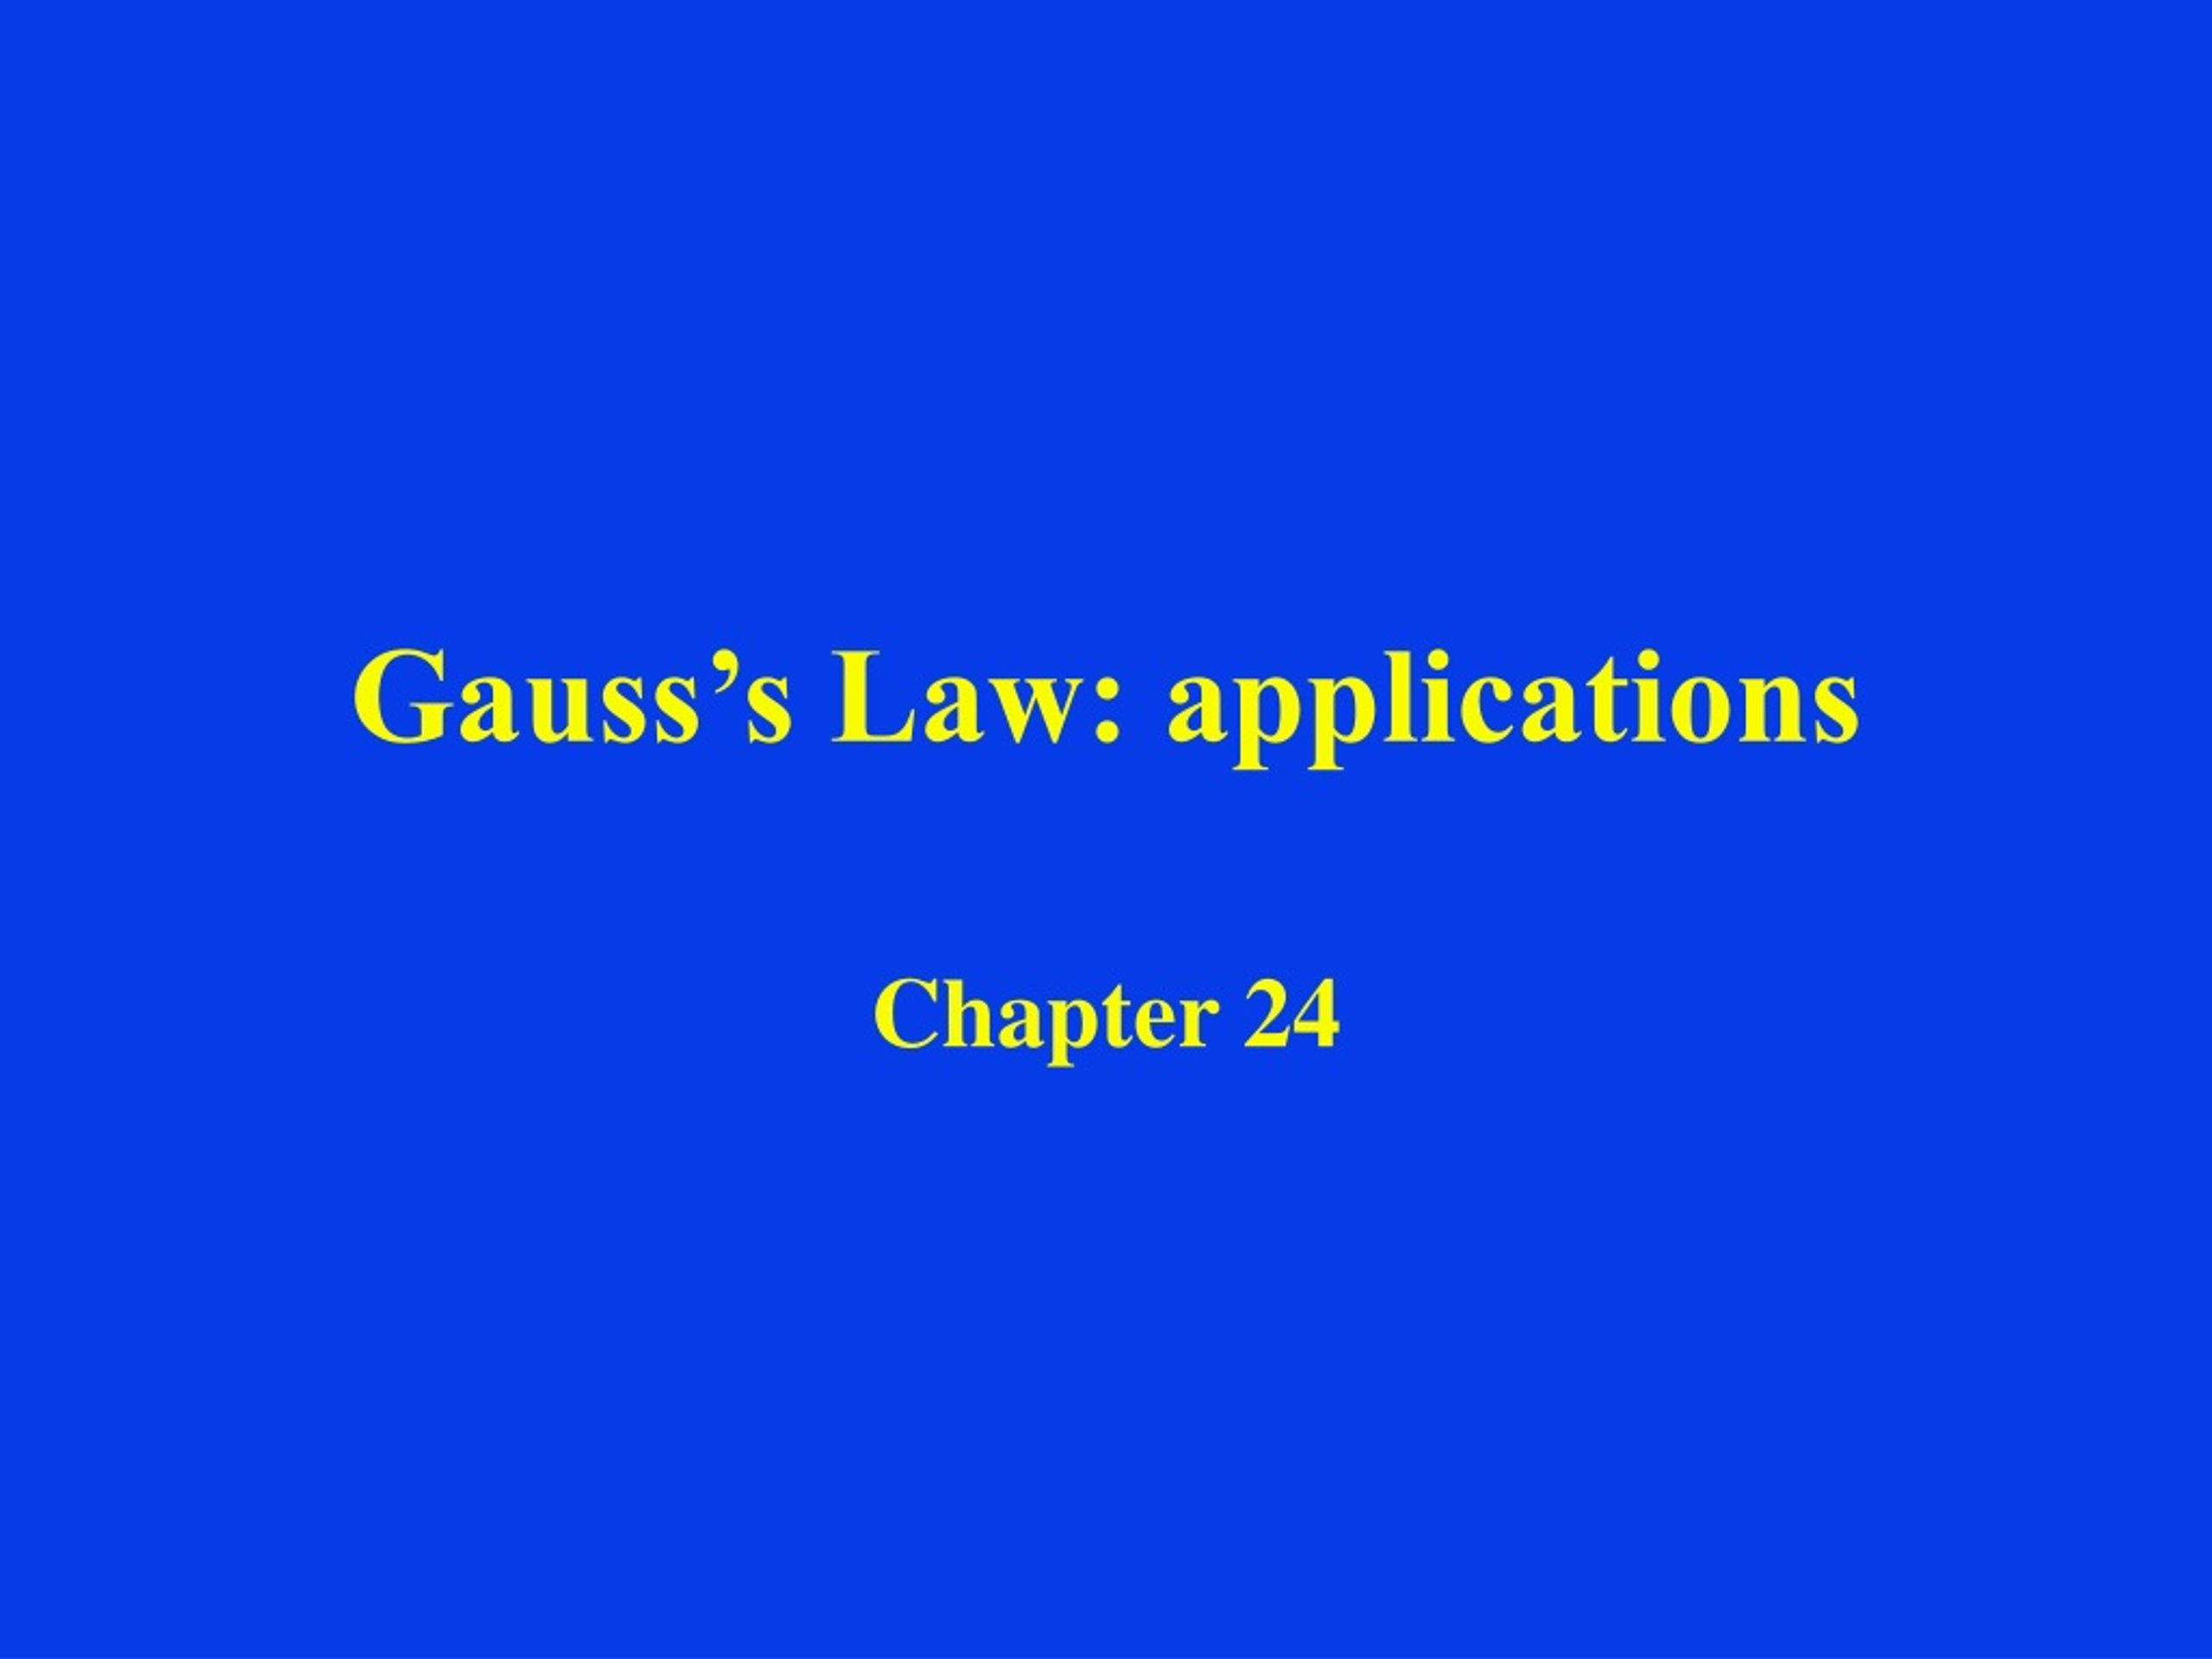 Ppt Gausss Law Applications Powerpoint Presentation Free Download Id9132626 1520